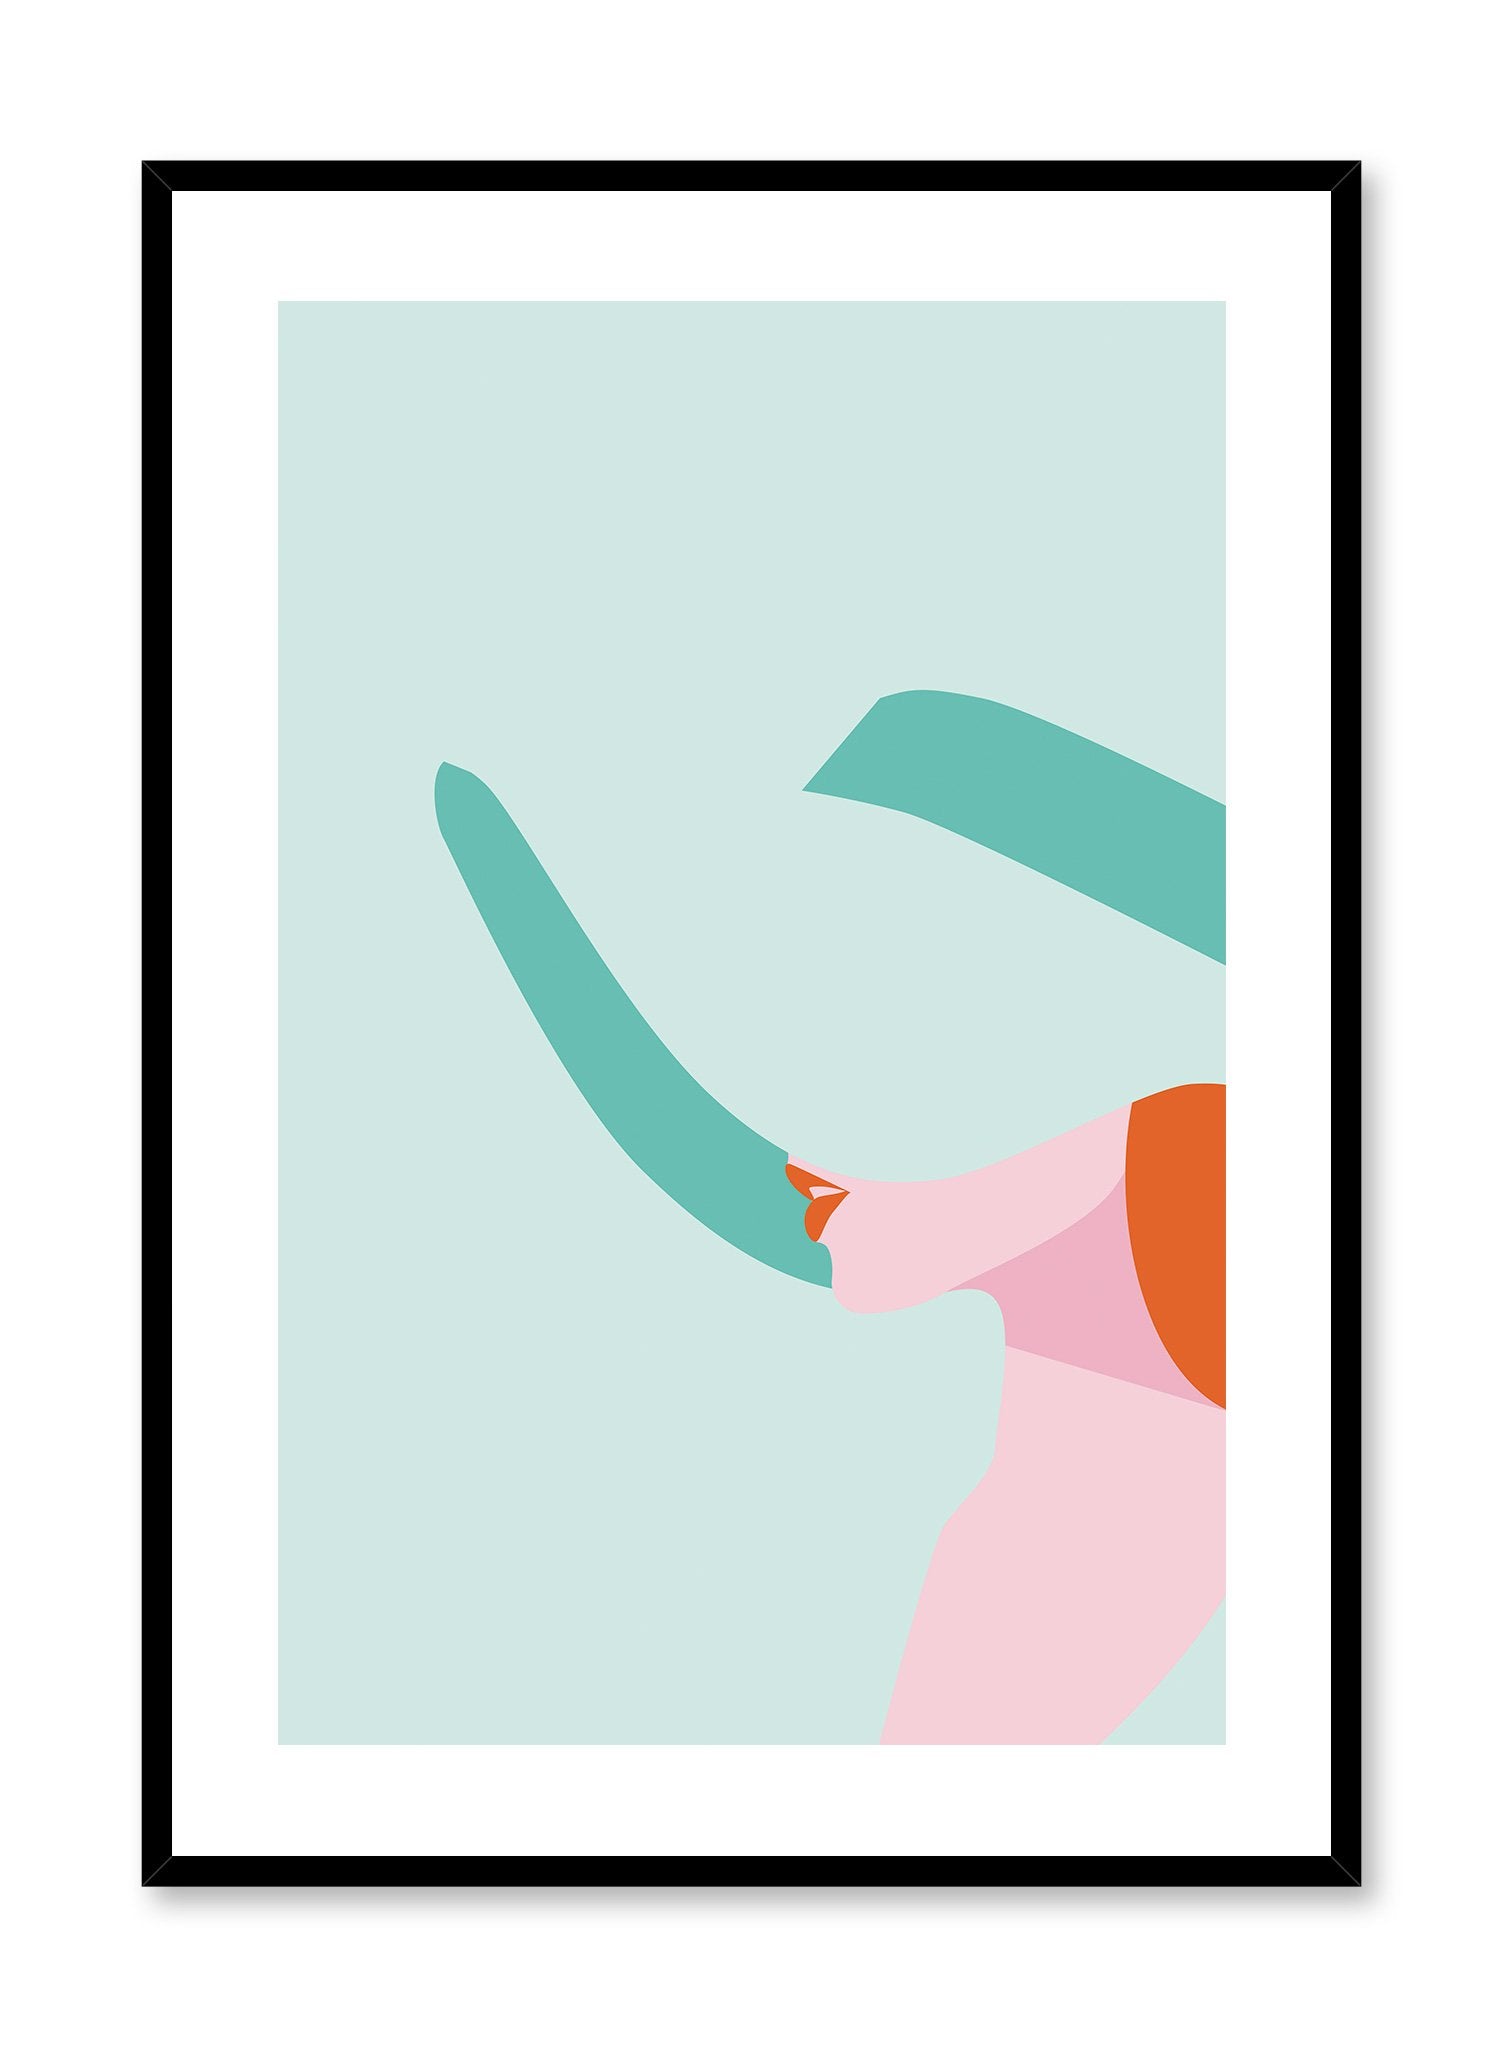 Shady Lady is a minimalist illustration poster of a glamorous woman with a large sunhat by Opposite Wall.